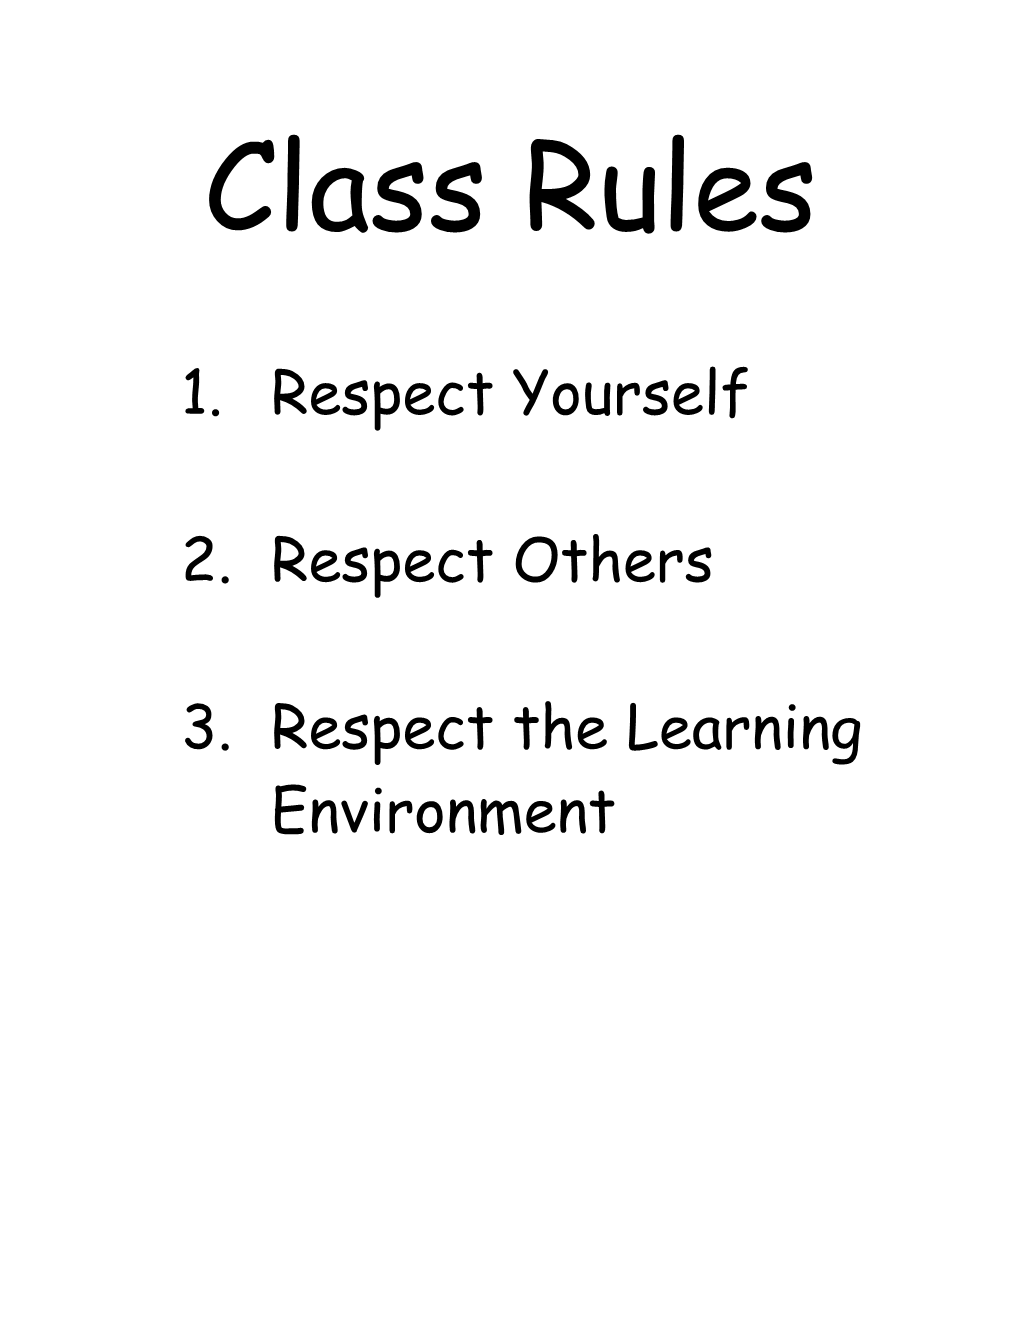 Respect the Learning Environment